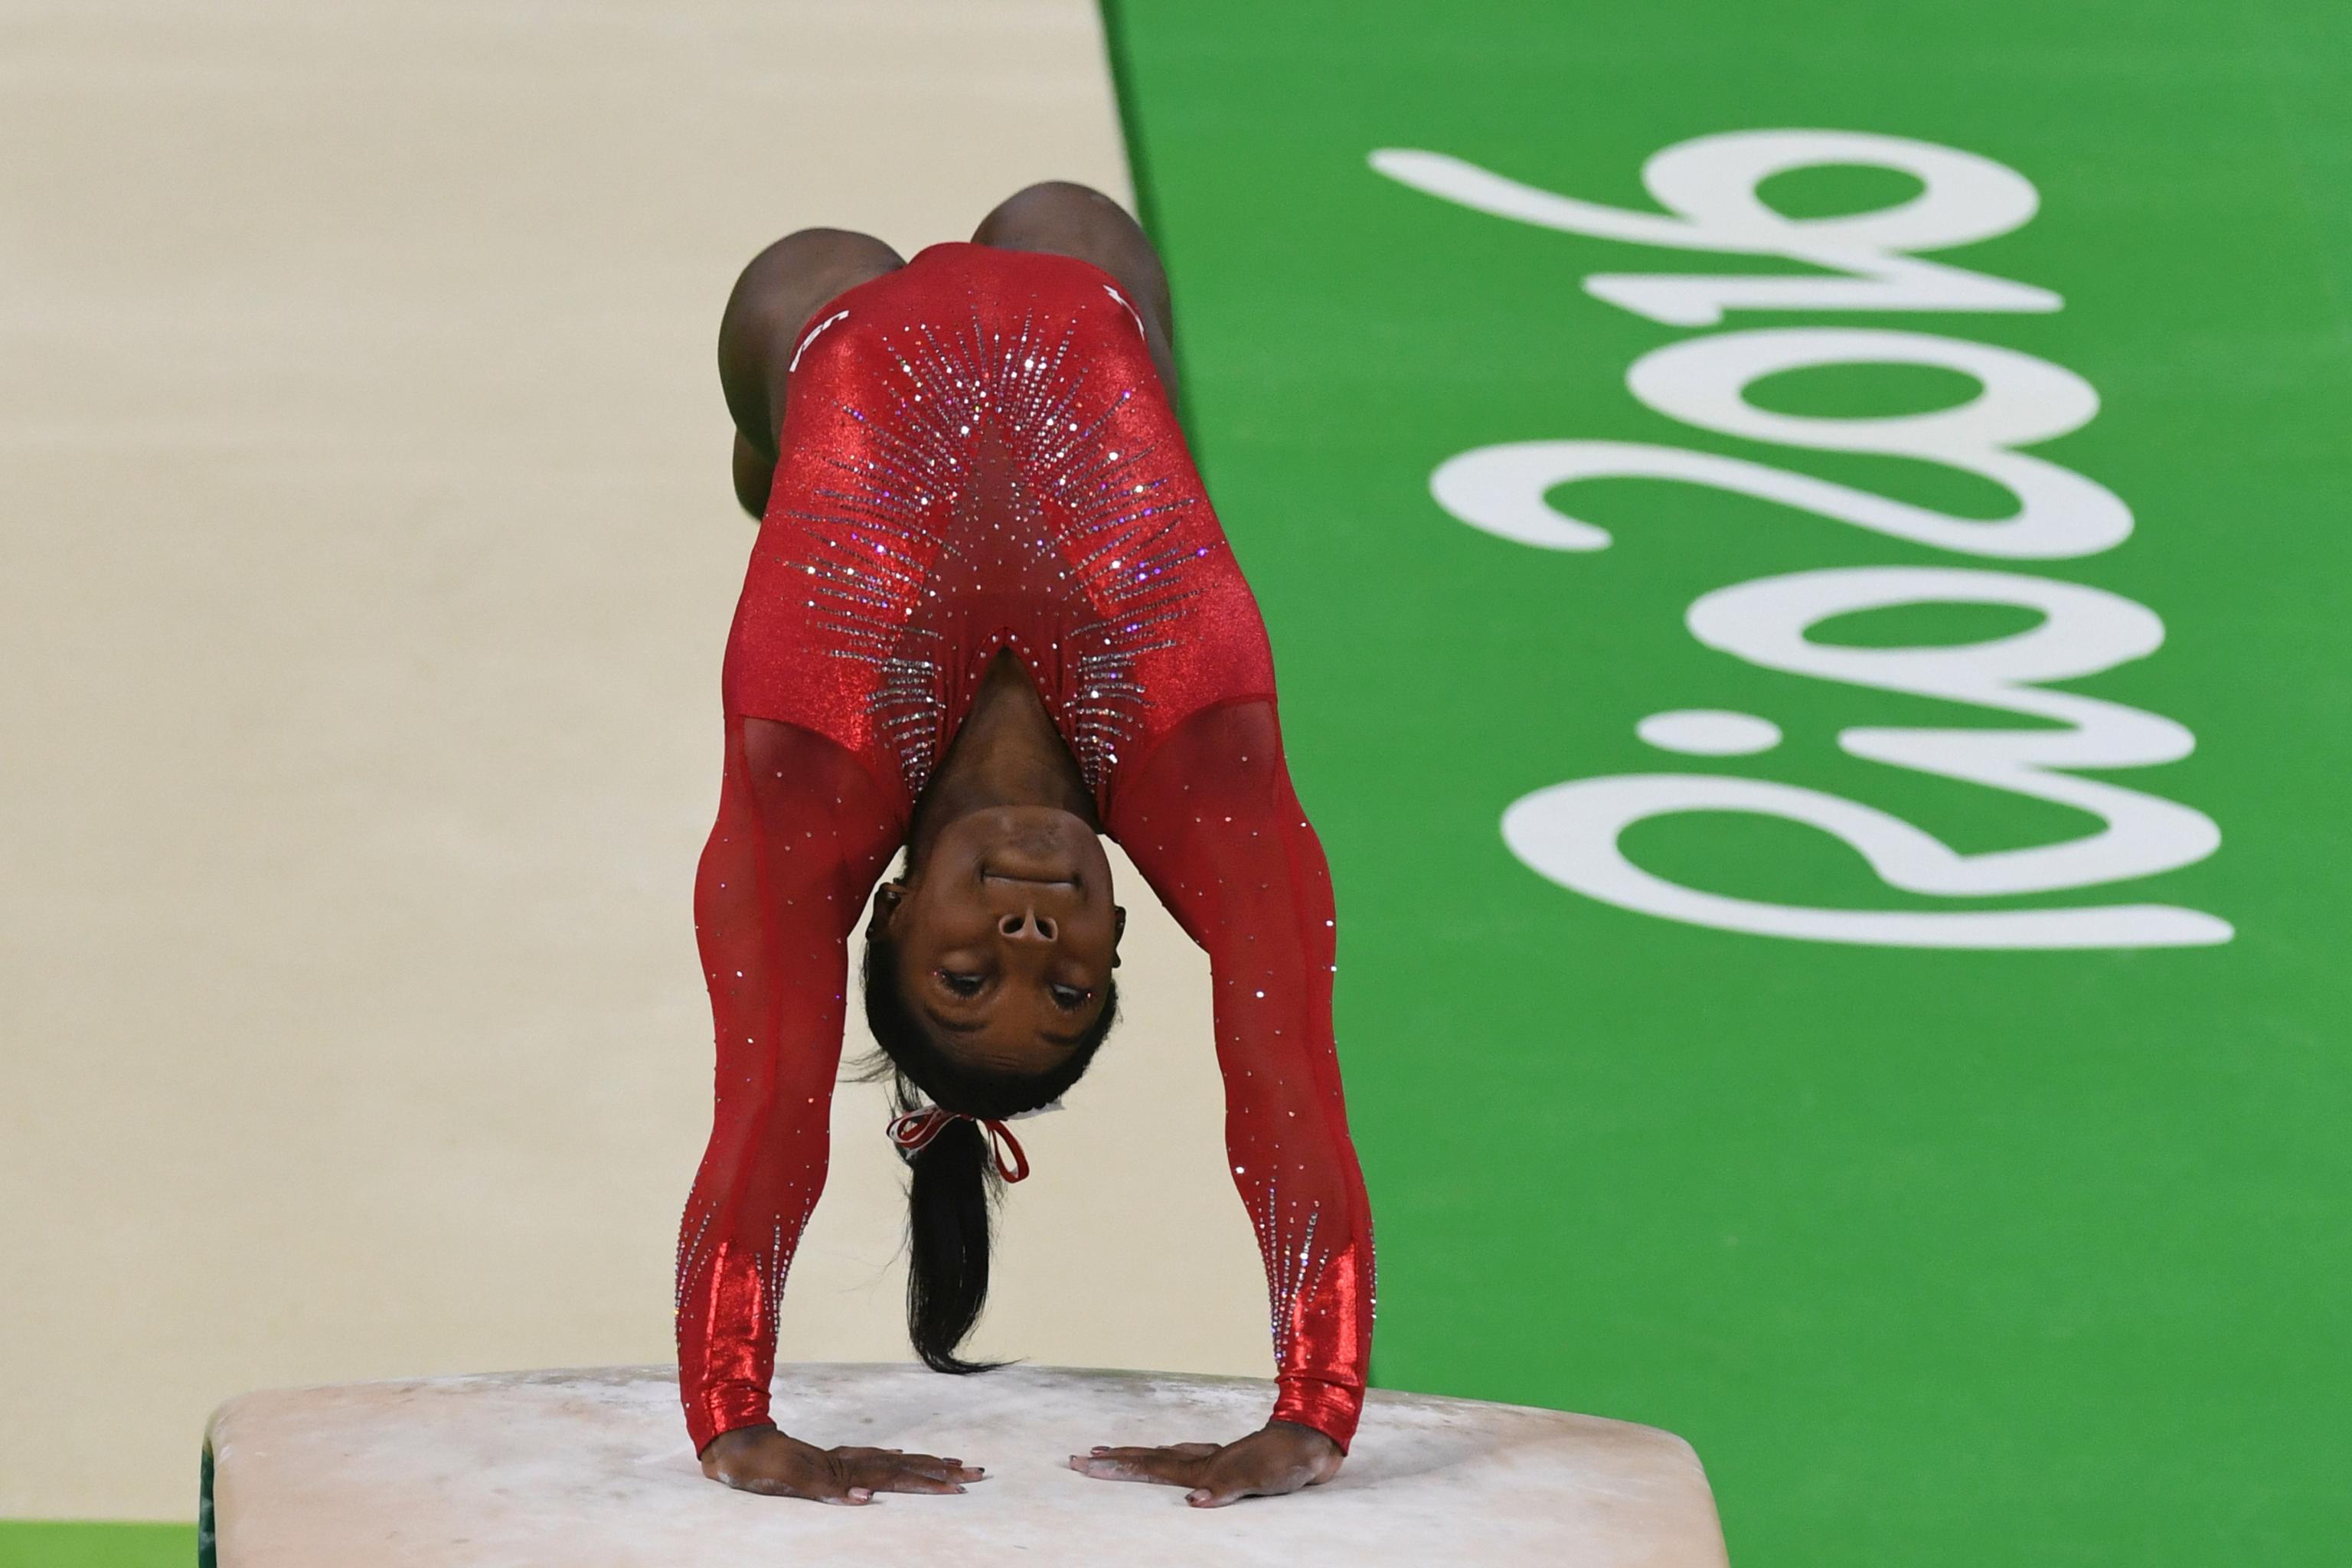 Olympic Women S Gymnastics 16 Vault Medal Winners Scores And Results Bleacher Report Latest News Videos And Highlights